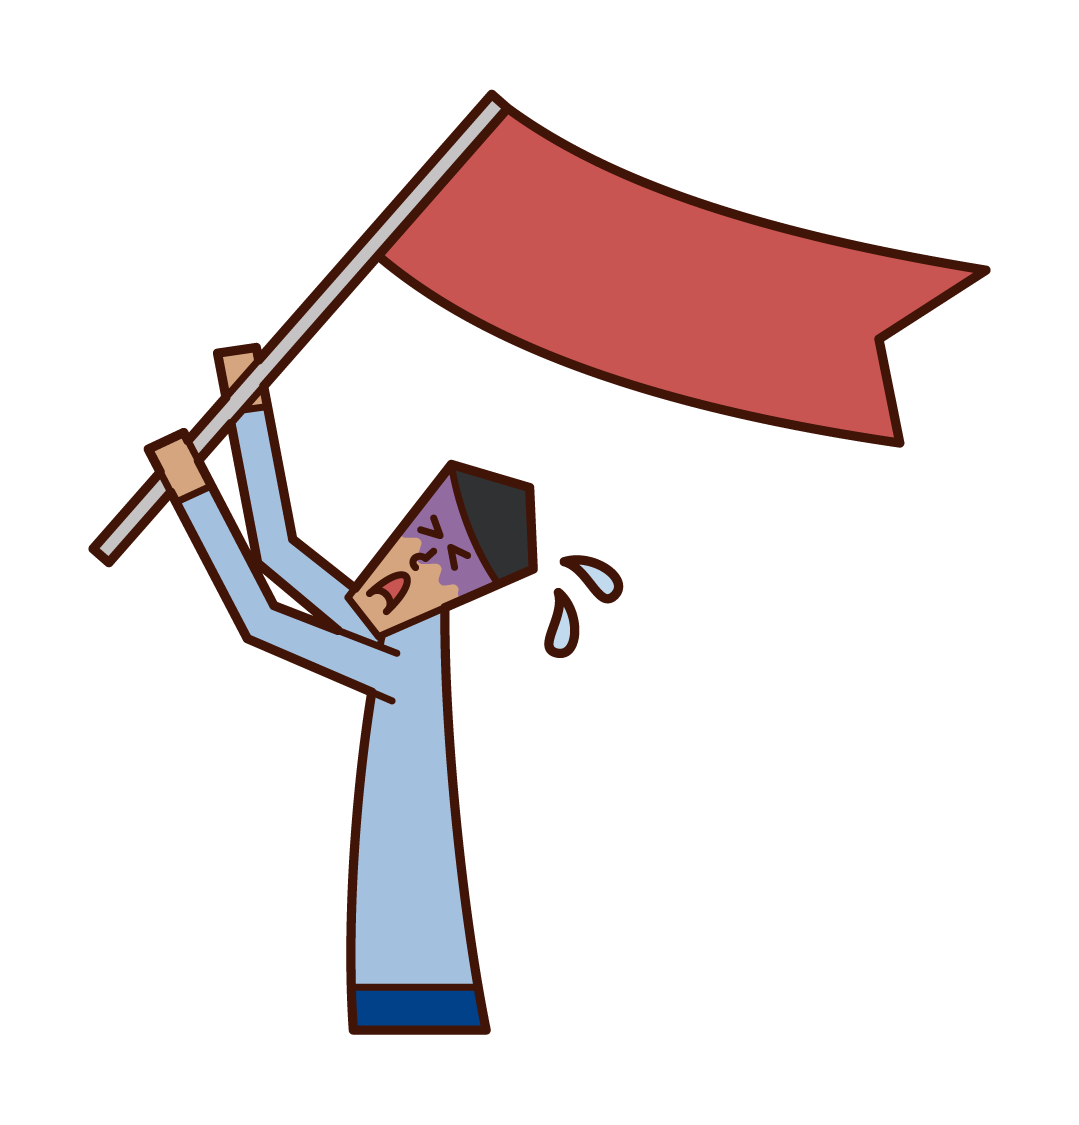 Illustration of a man waving a flag and asking for SOS